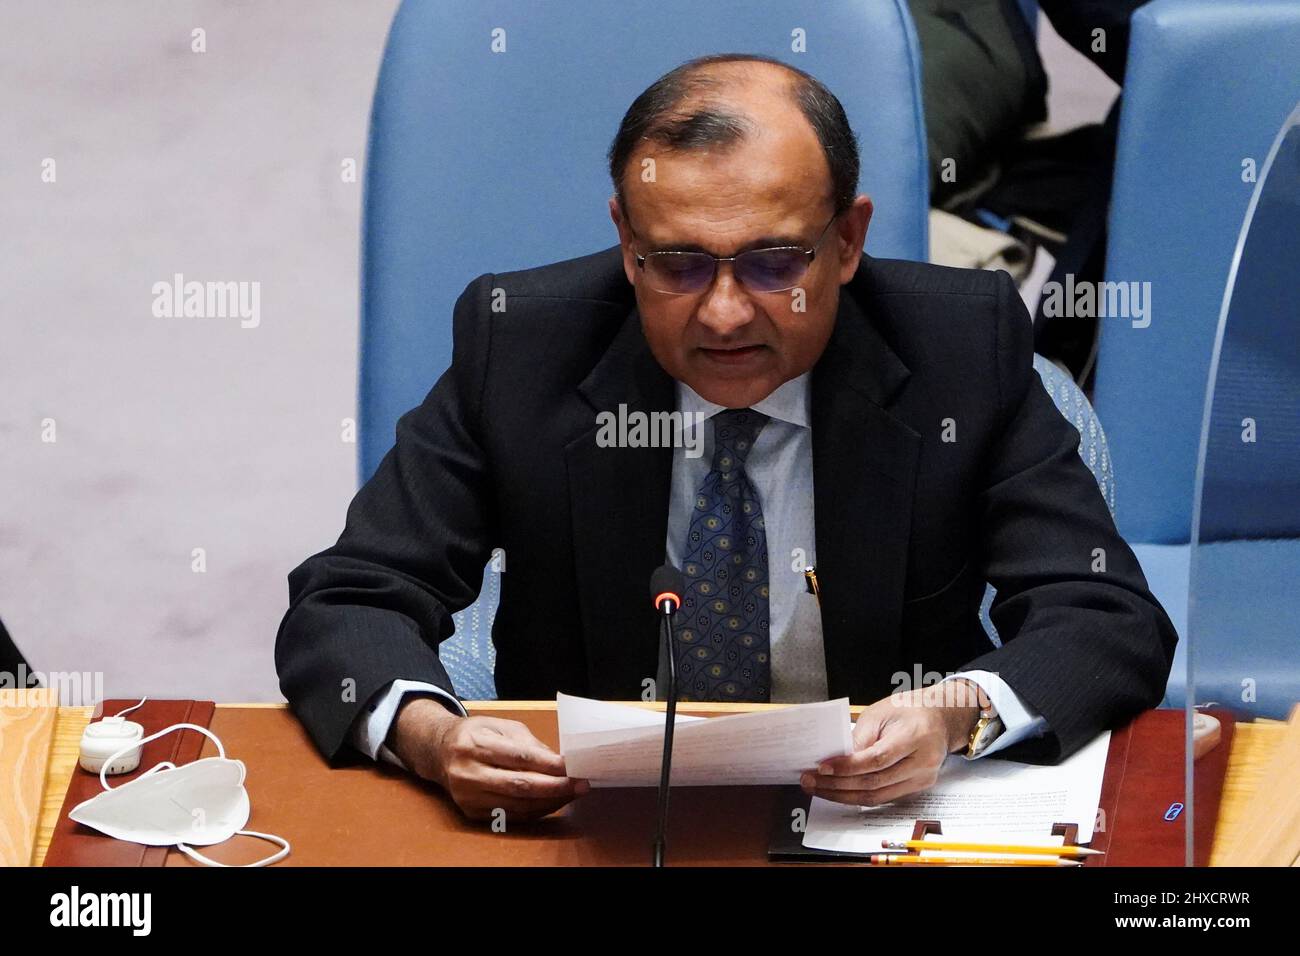 India's Ambassador to the United Nations T. S. Tirumurti speaks during the United Nations Security Council meeting on Threats to International Peace and Security, following Russia's invasion of Ukraine, in New York City, U.S. March 11, 2022. REUTERS/Carlo Allegri Stock Photo